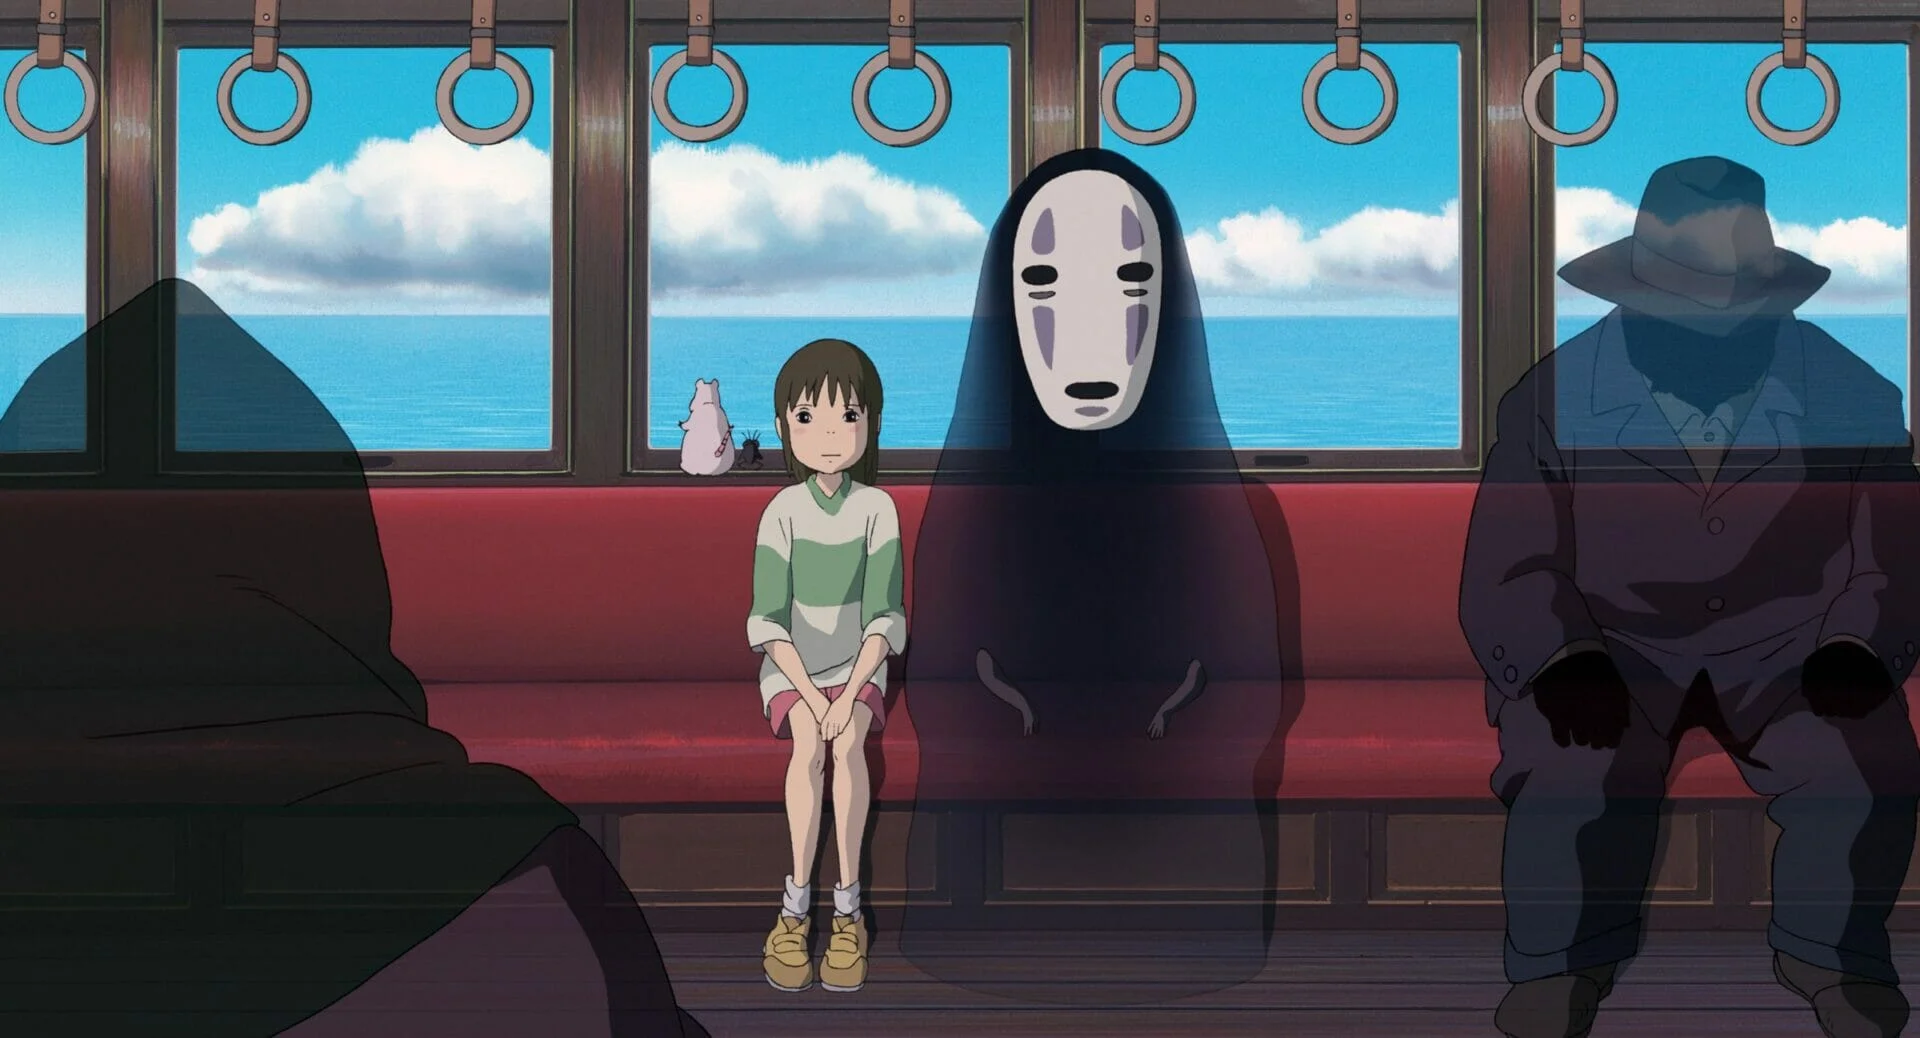 Spirited Away | An otherworldly journey for growing up